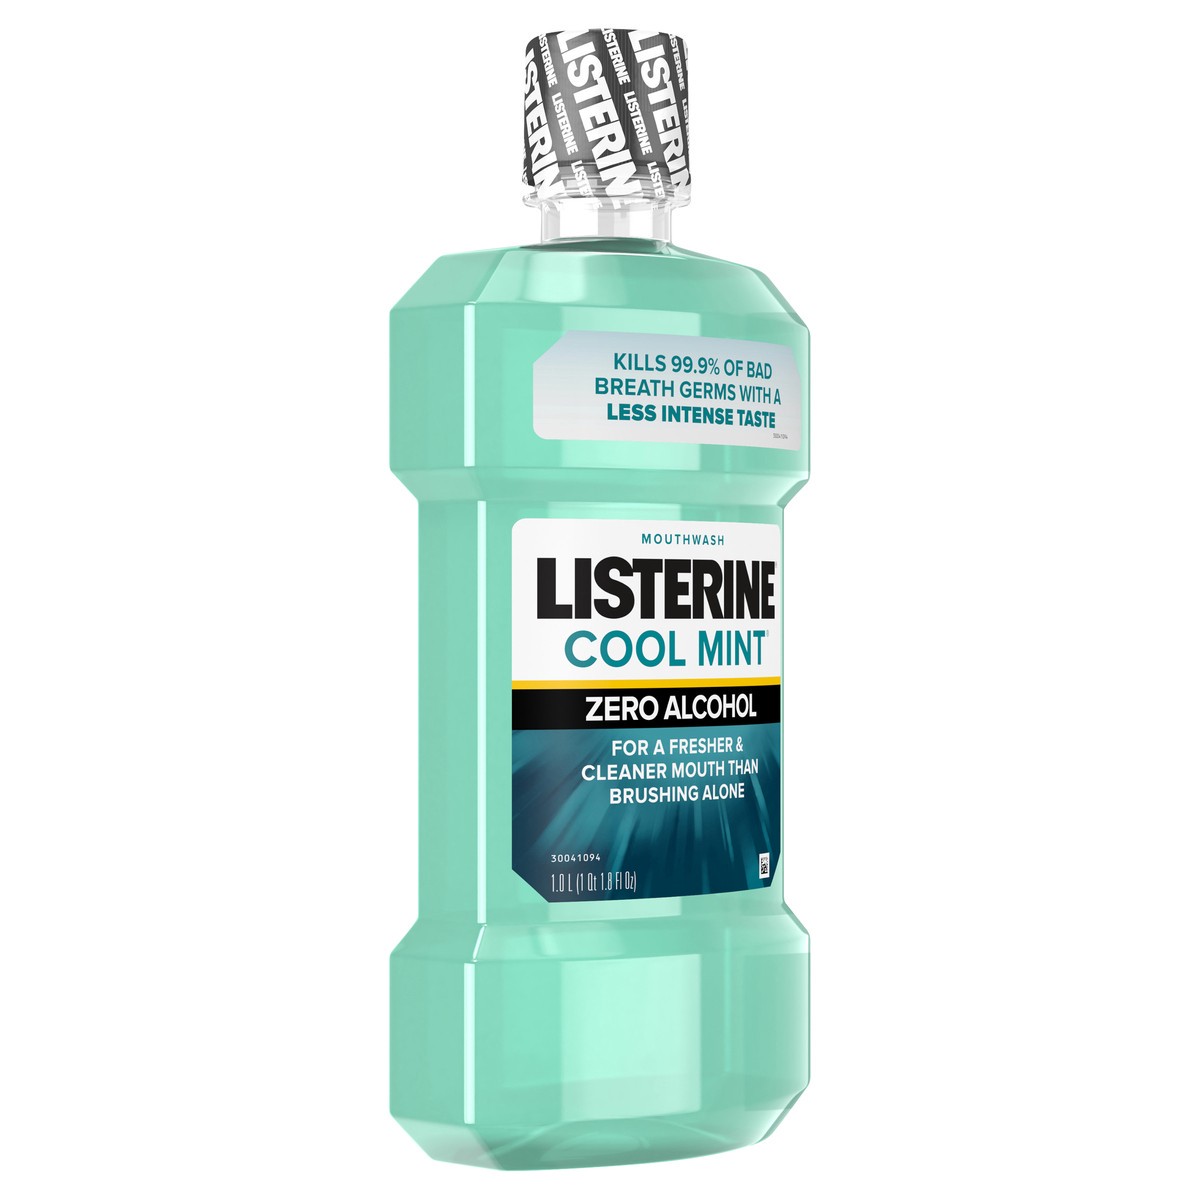 slide 4 of 6, Listerine Mouthwash, Zero Alcohol, Germ Killing, Less Intense Formula, Bad Breath Treatment, Alcohol Free Mouth Wash for Adults; Cool Mint Flavor, 1 L (Pack of 1), 33.8 oz